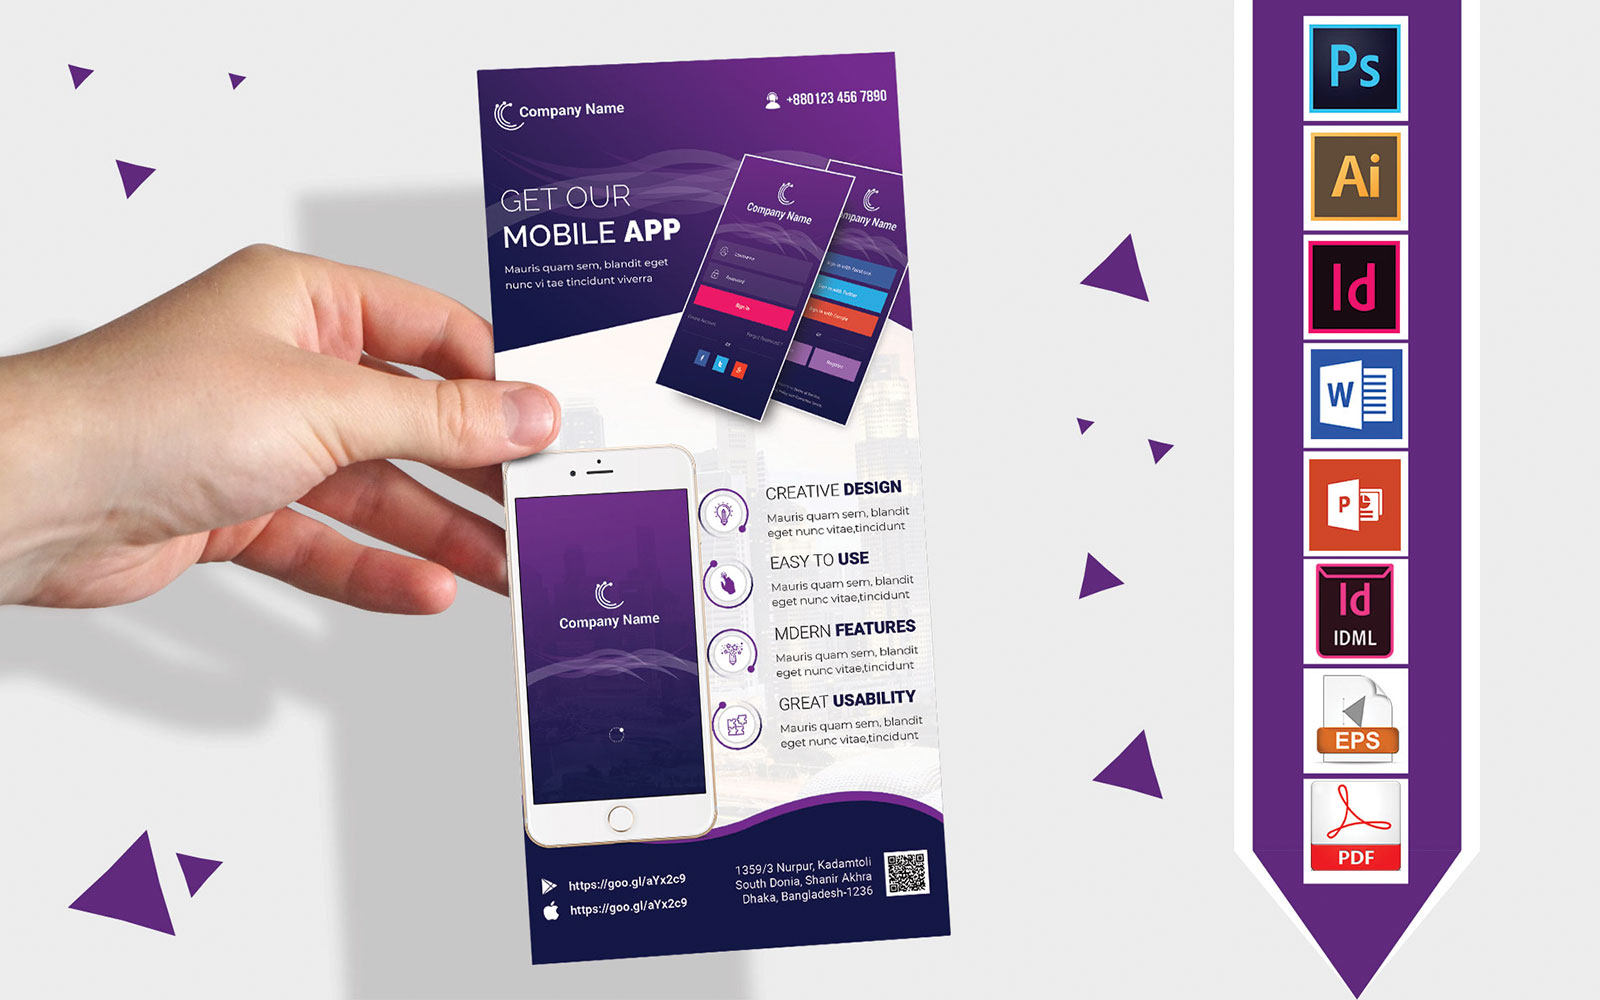 Rack Card | Mobile App Promotional DL Flyer Vol-01 - Corporate Identity Template